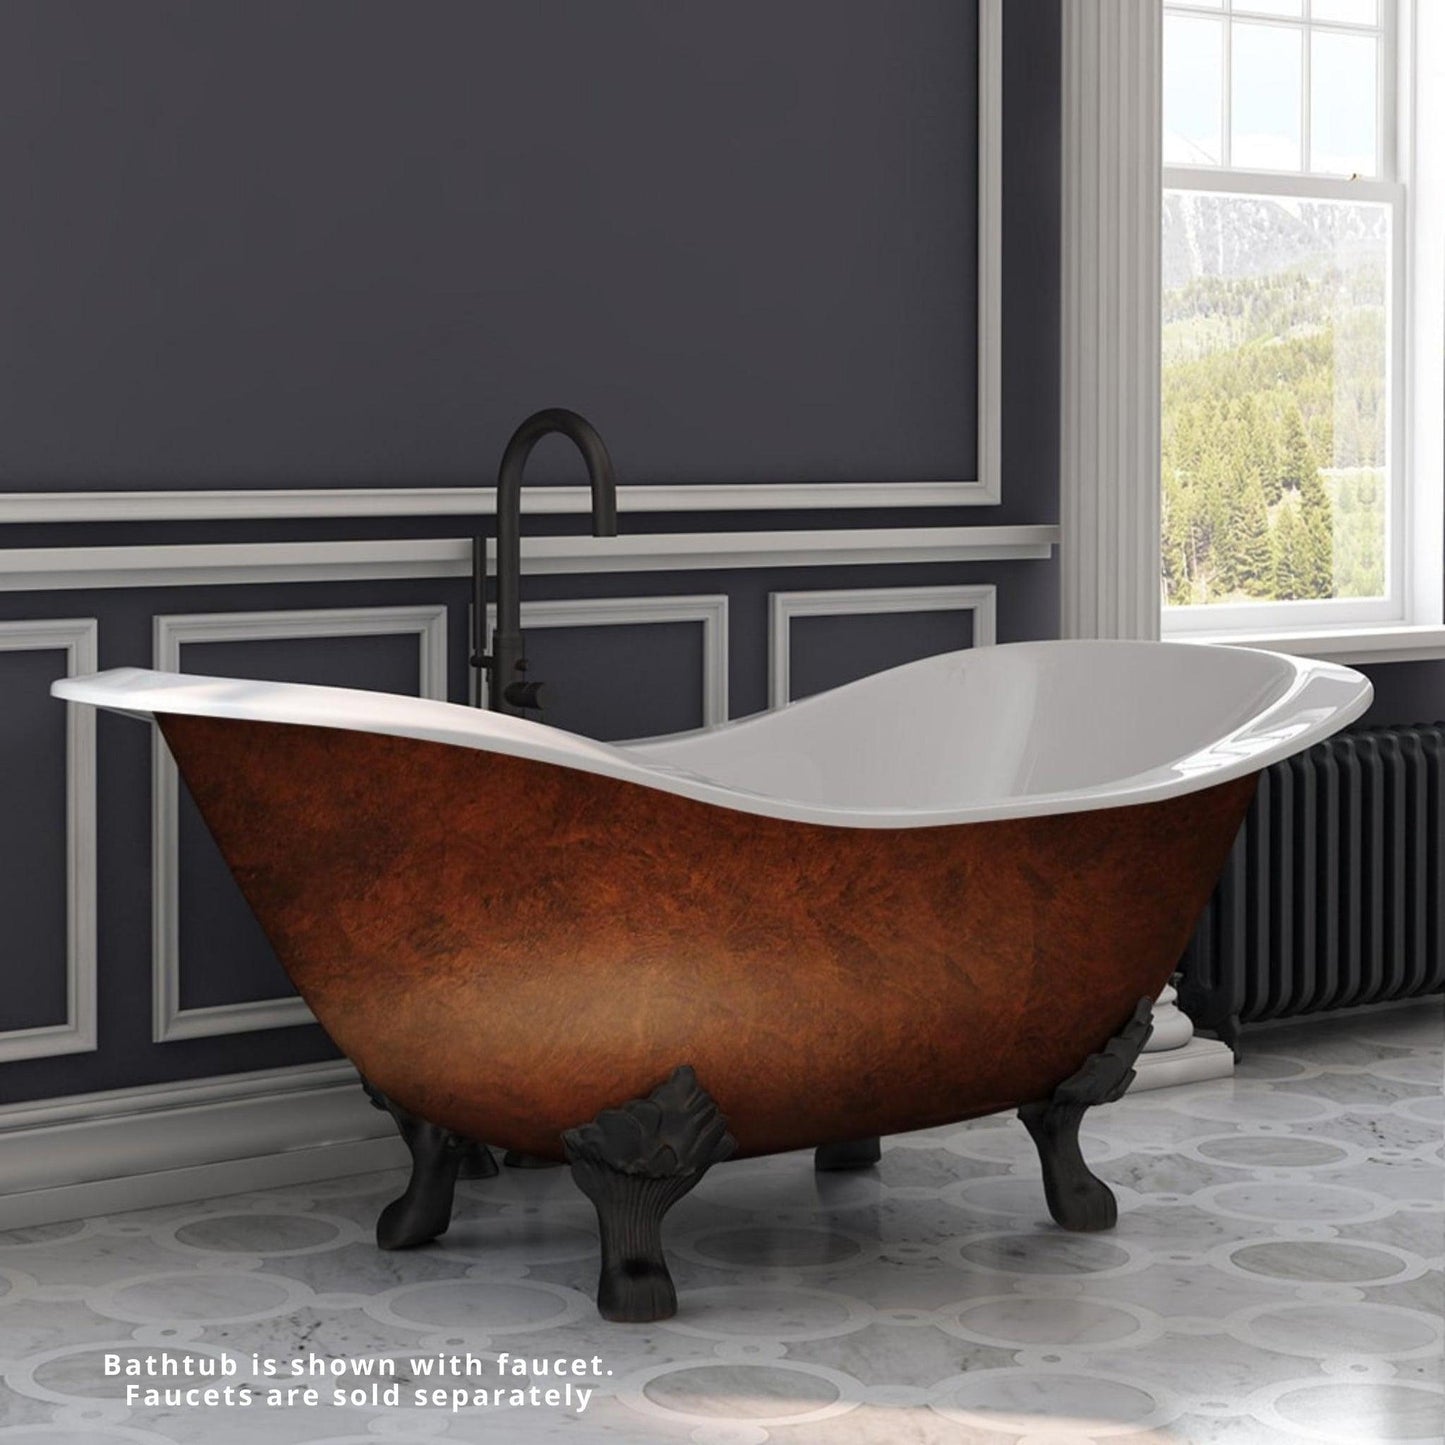 Cambridge Plumbing 72" Cast Iron Double Slipper Copper Bronze Clawfoot Bathtub With No Faucet Holes With Oil Rubbed Bronze Lion’s Paw Feet